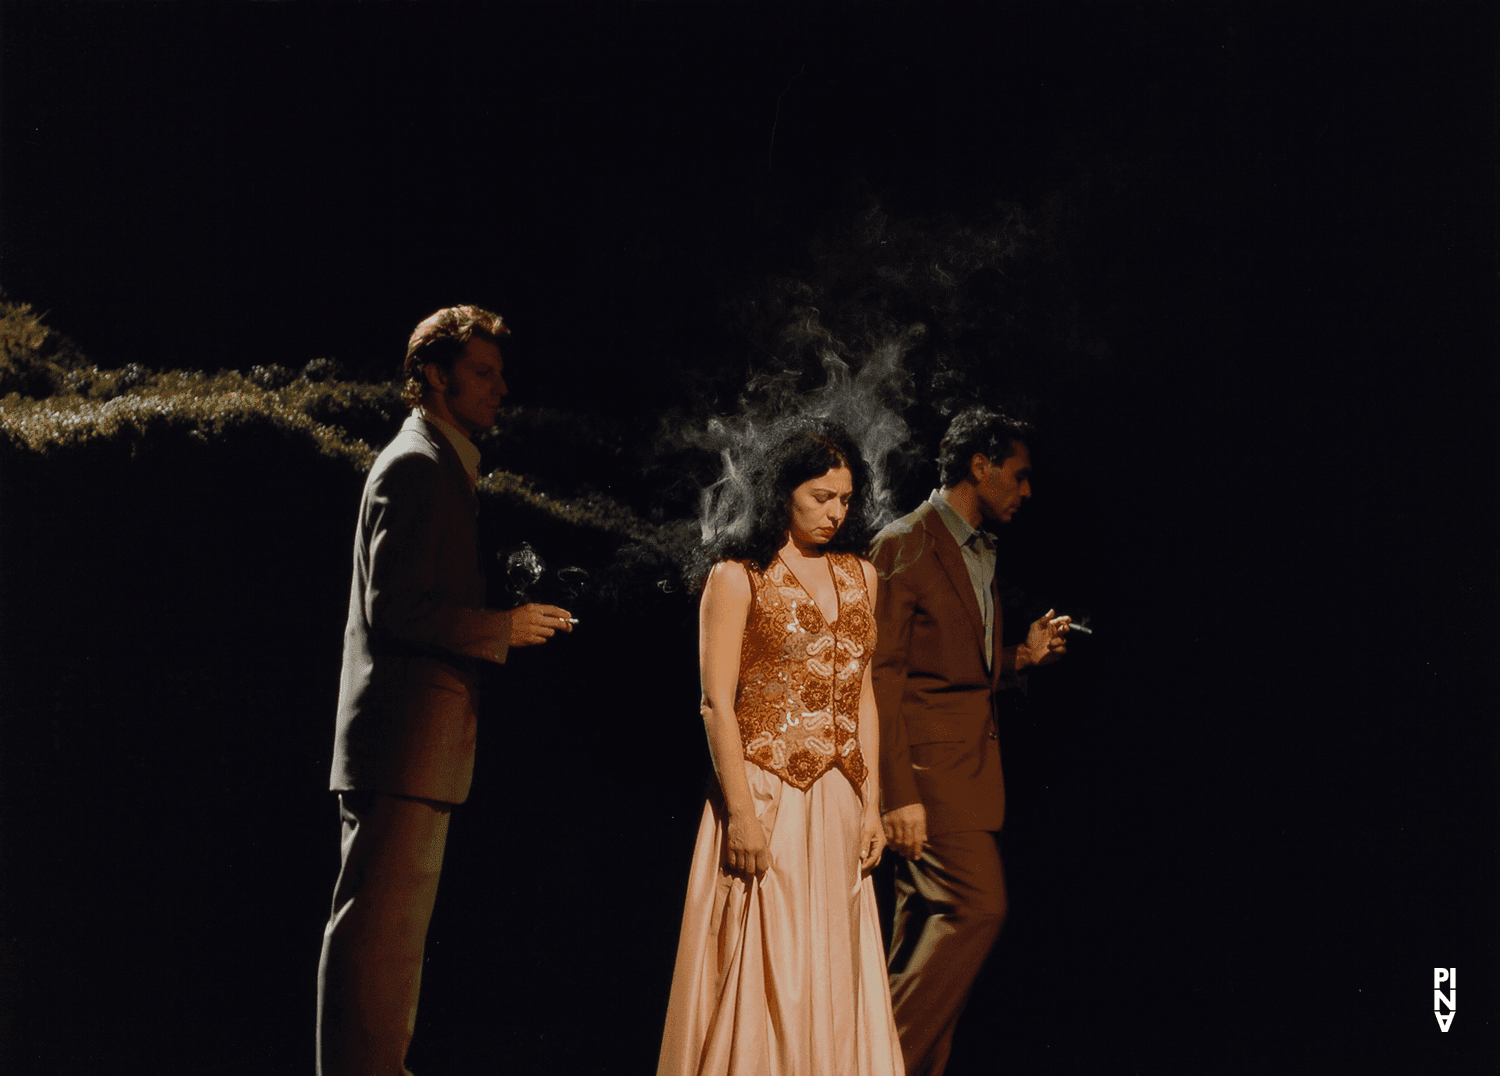 Daphnis Kokkinos, Pascal Merighi and Aida Vainieri in “Wiesenland” by Pina Bausch